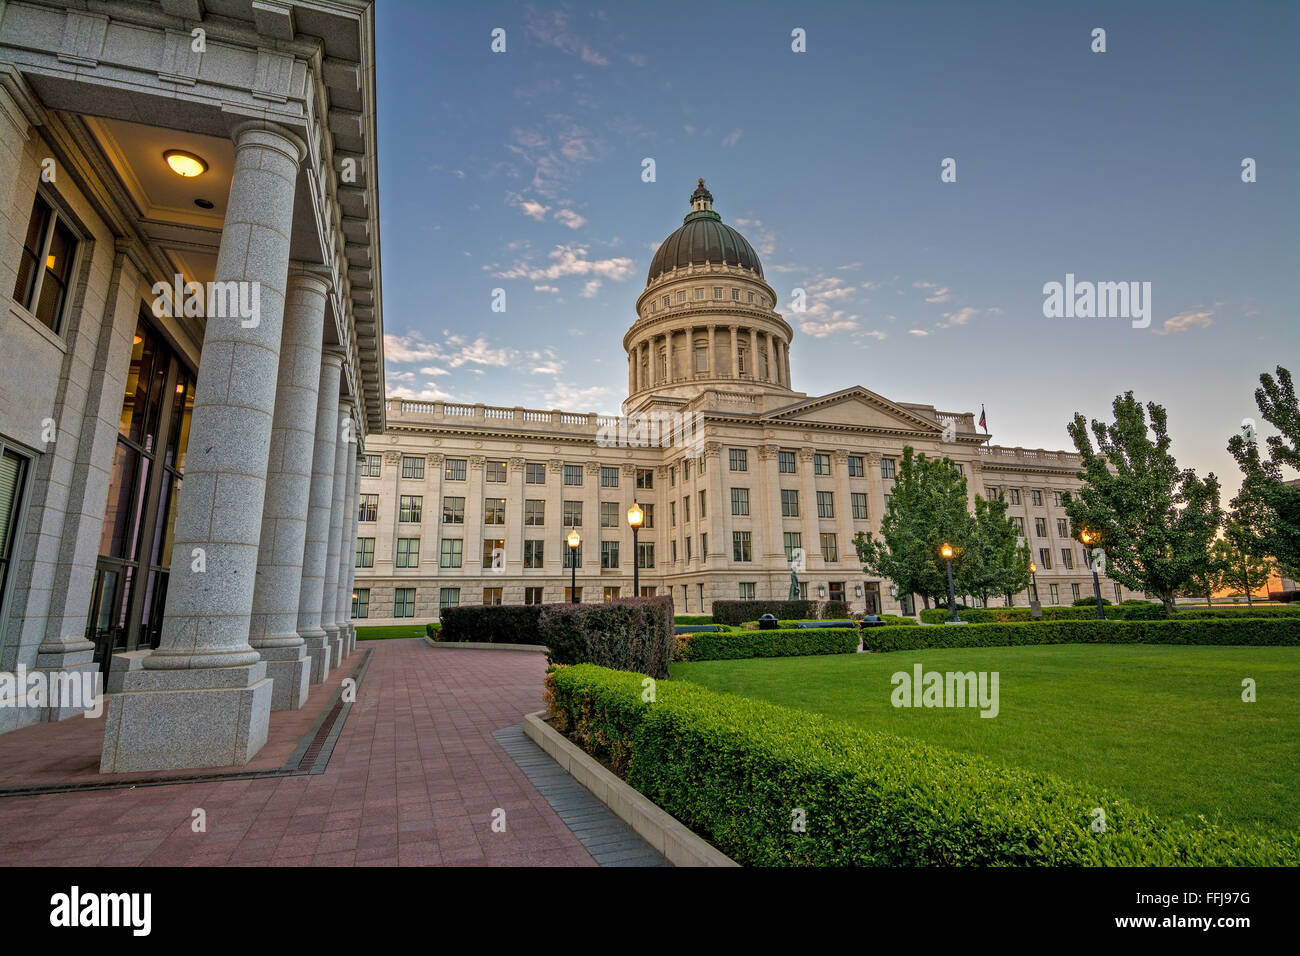 Unique view of the Utah state capital building and park Stock Photo